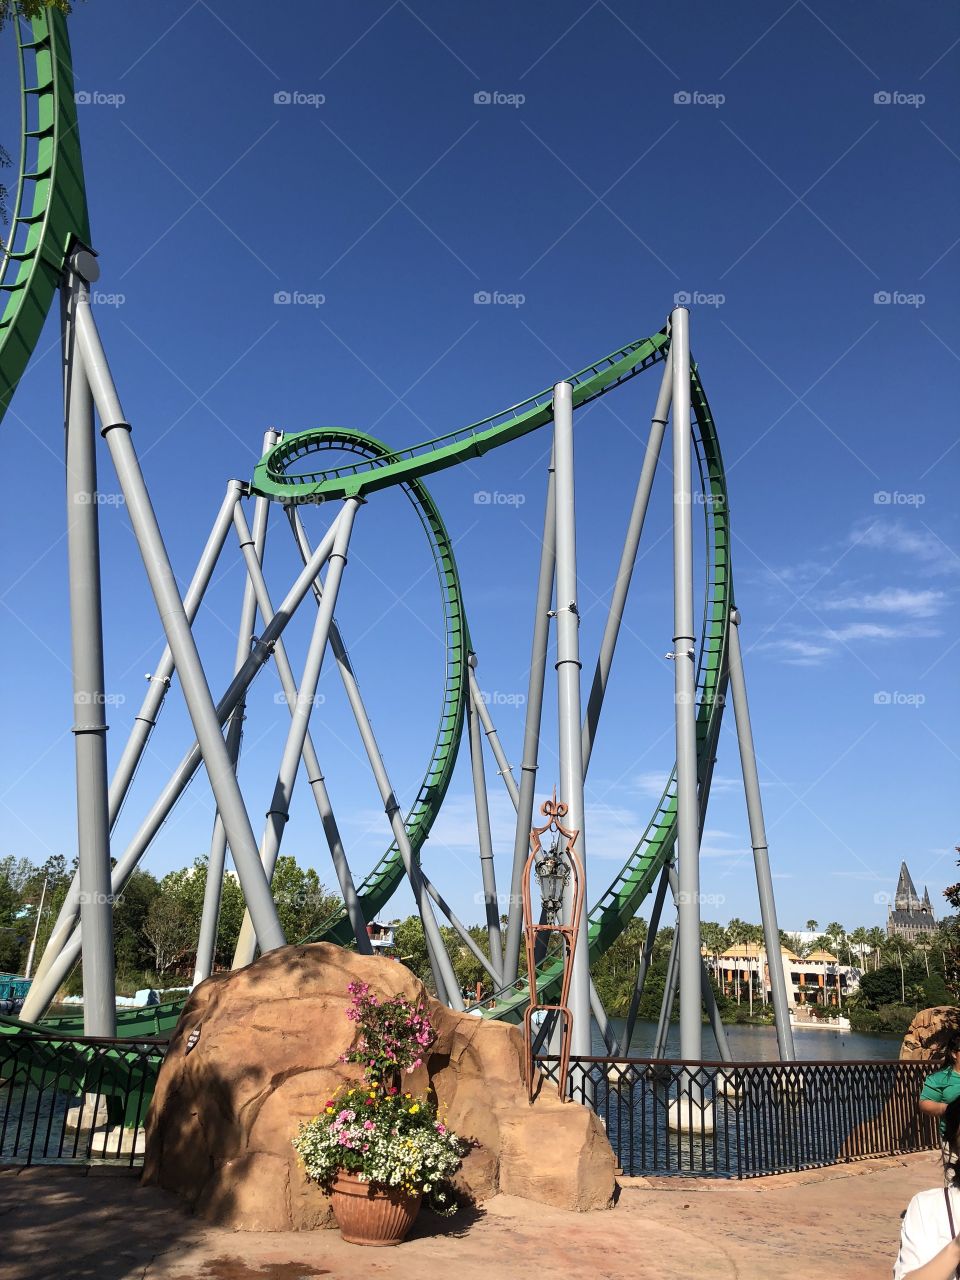 Any thrill-seeker would love this roller coaster. This photo gives an incredible view of this Marvel-based ride. 